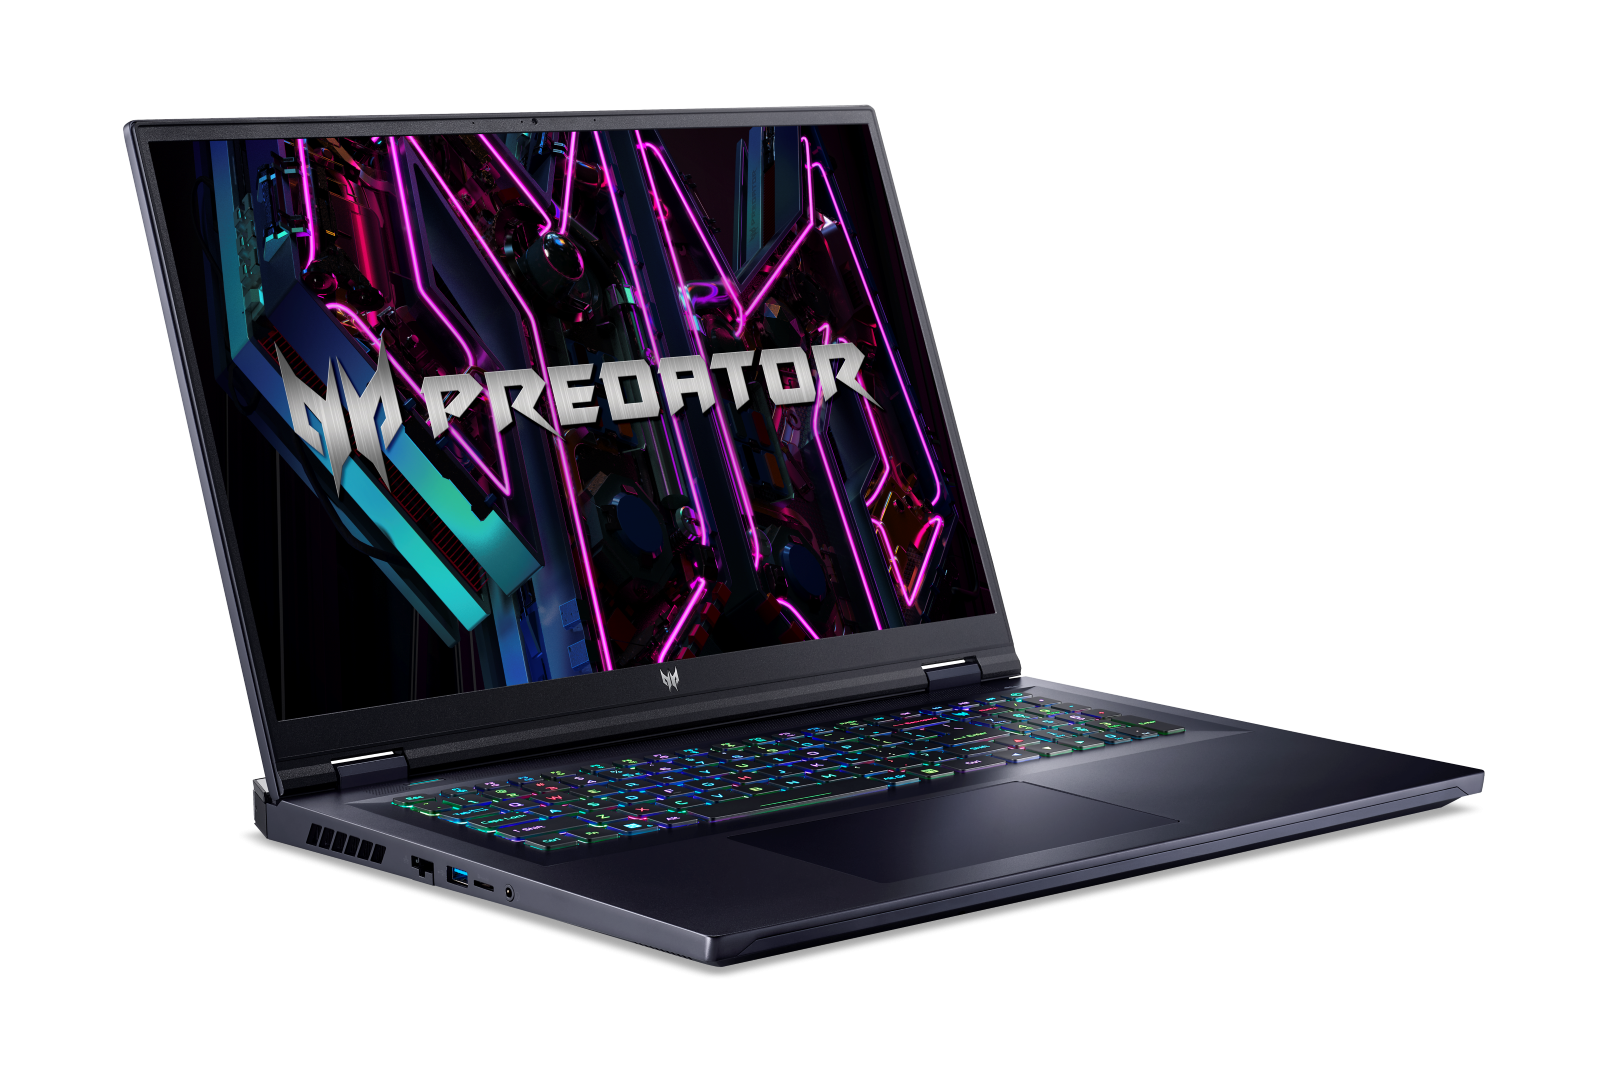 Laptop Acer Predator Helios 18 PH18-71, 18.0" display with IPS (In-Plane Switching) technology, WQXGA 2560 x 1600, high-brightness (500 nits) Acer ComfyView™ LED-backlit TFT LCD, supporting 240 Hz, Grey to Grey 3 ms by Overdrive, Nvidia Advanced Optimus capable, 16:10 aspect ratio, DCI-P3 100%, Wide